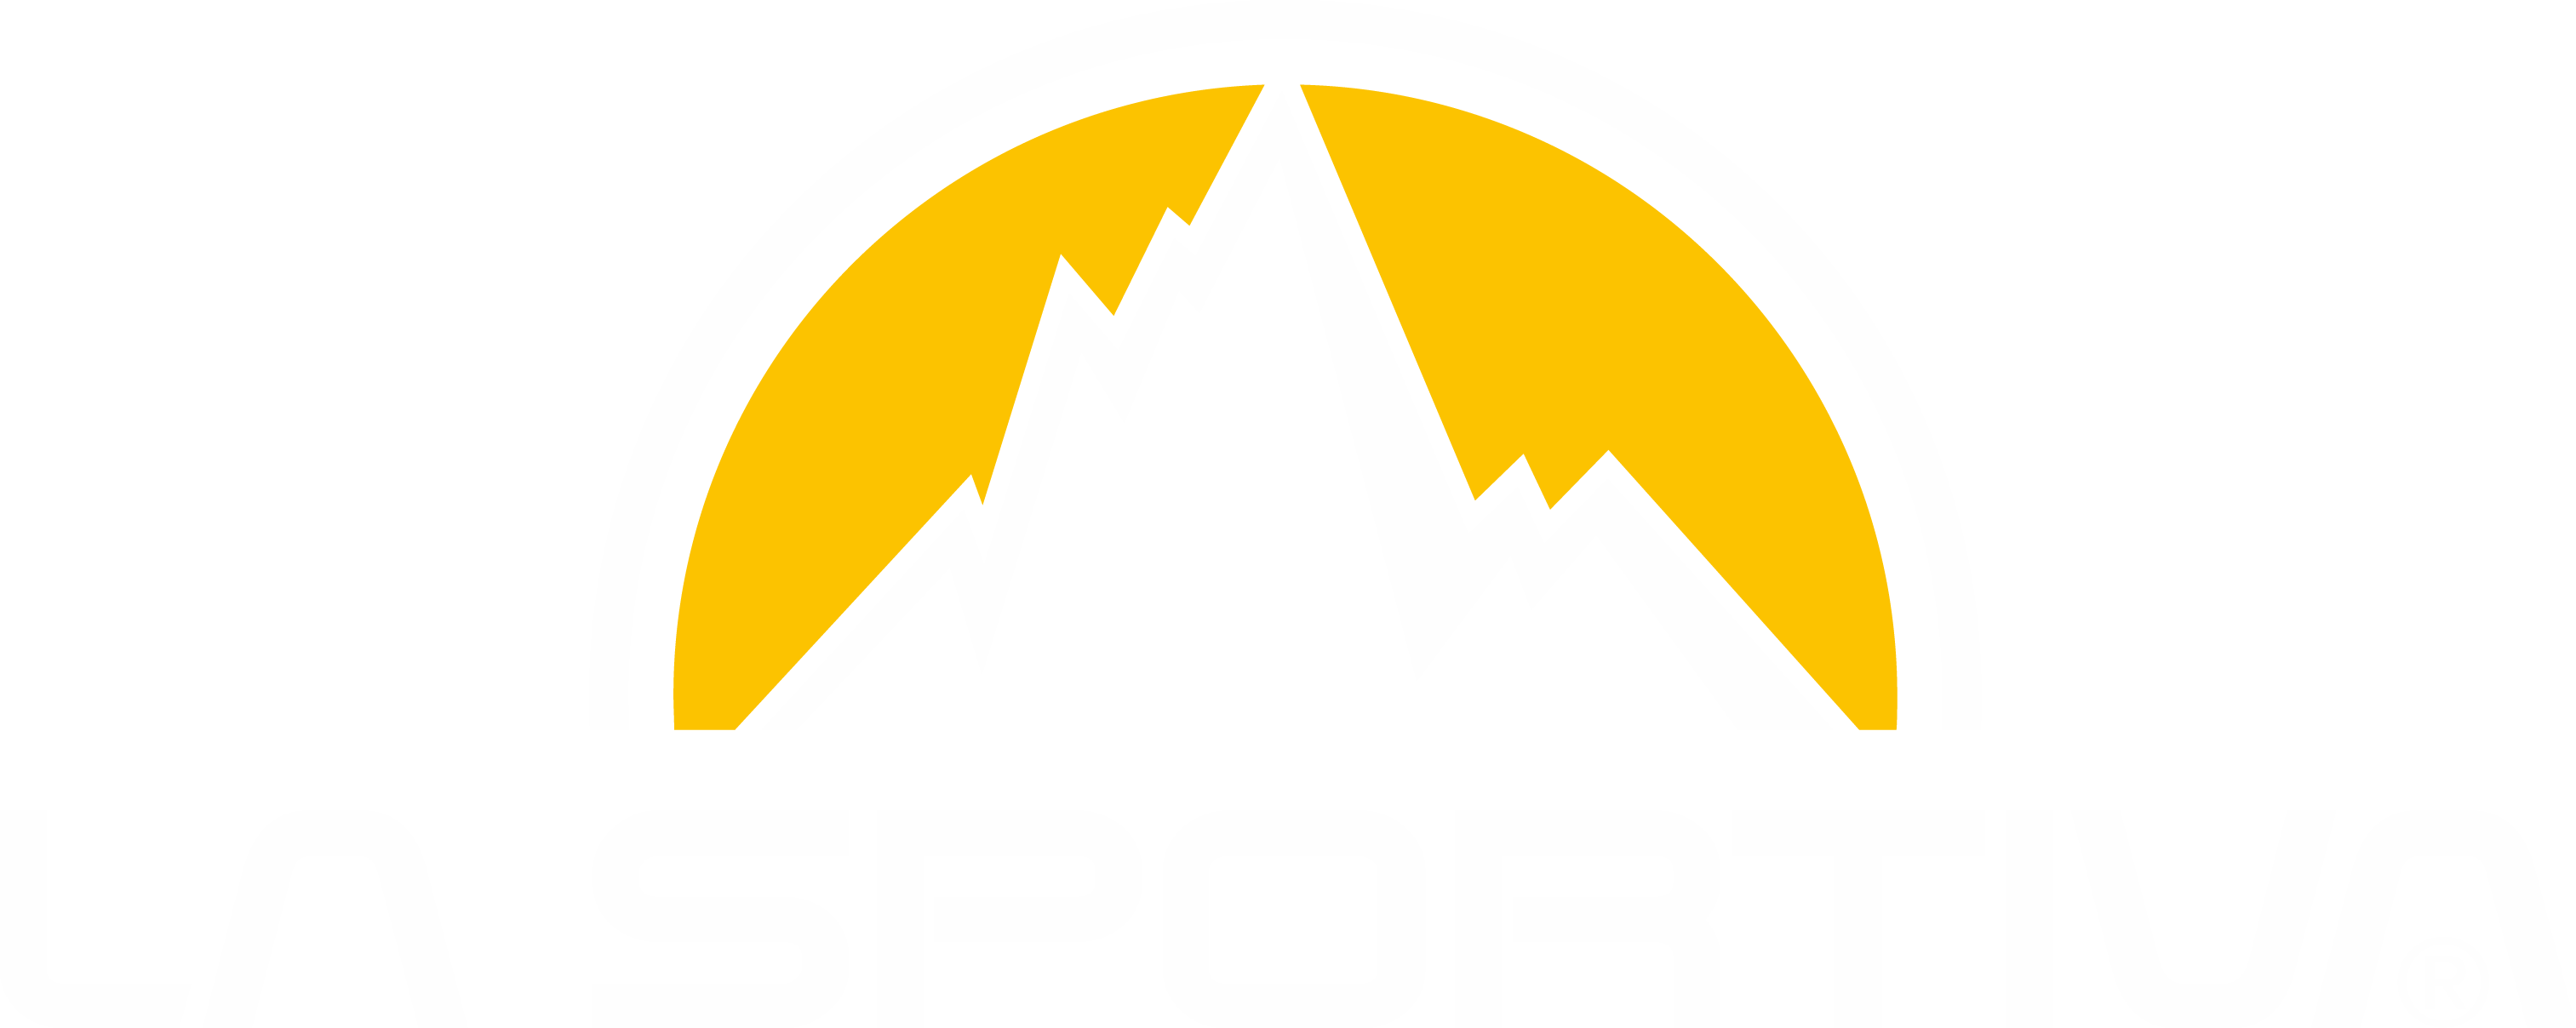 Next Year It's The Time For The Women - La Sportiva Logo White (3026x1208)